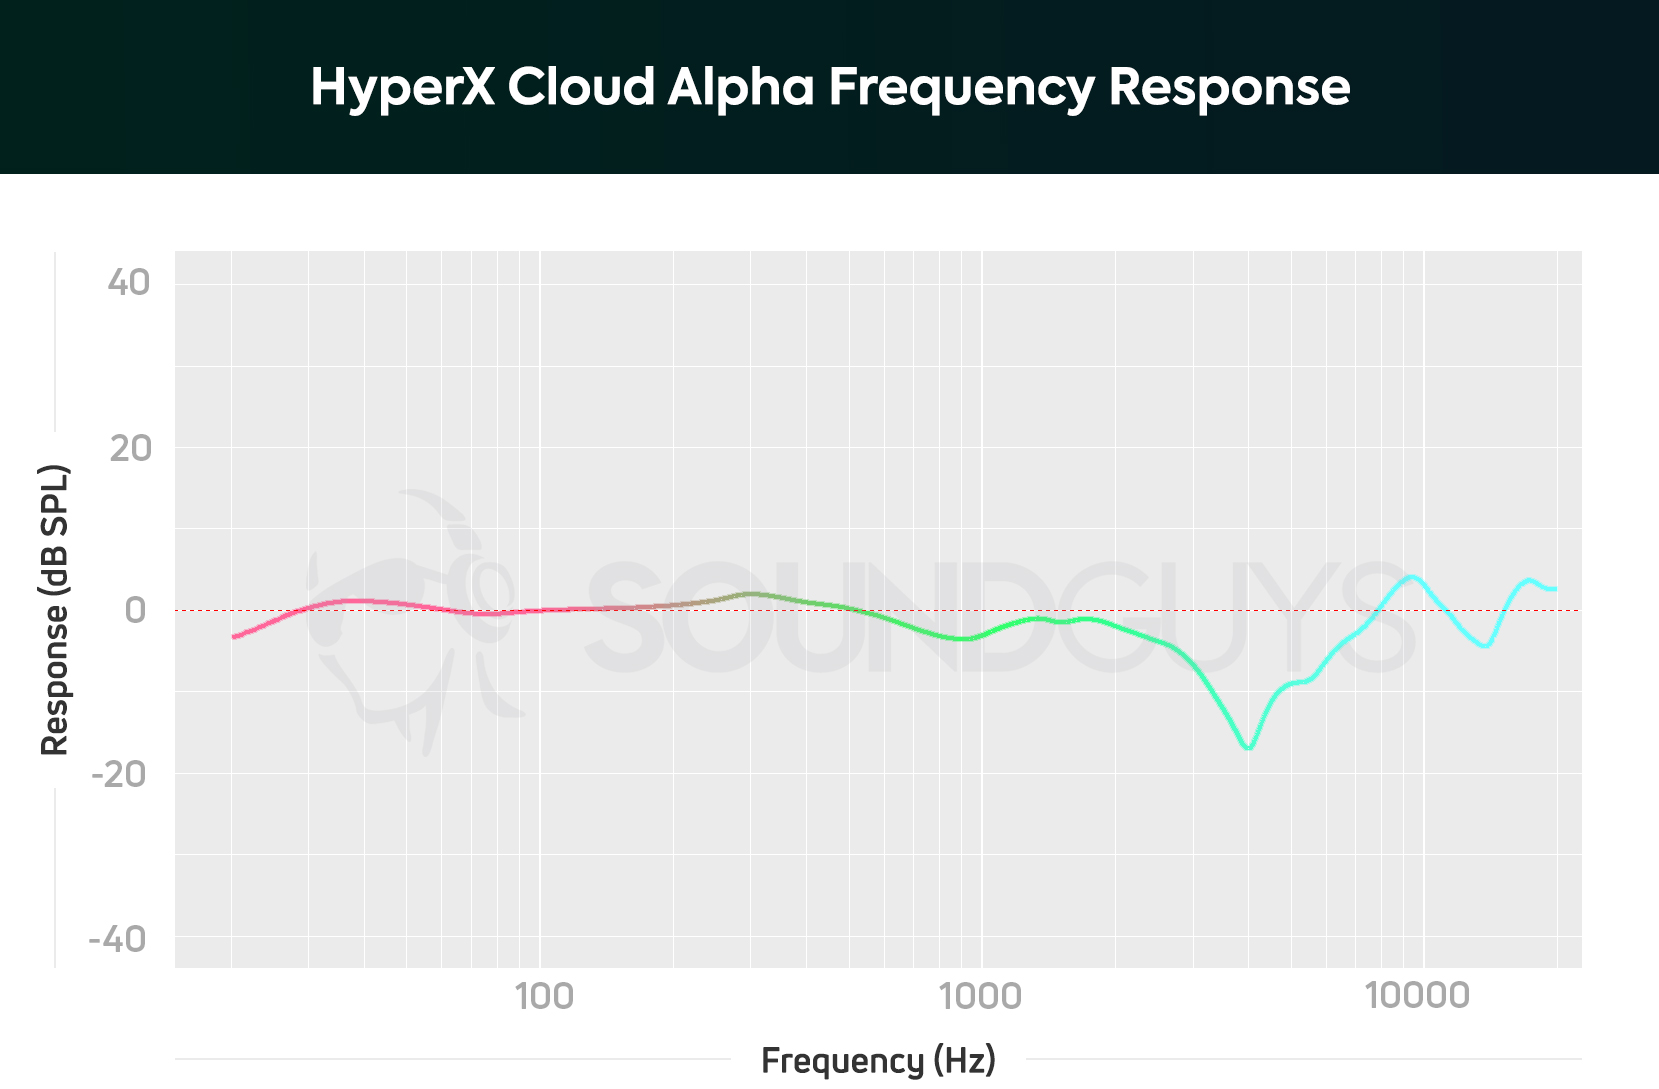 Chart showing the HyperX Cloud Alpha frequency response